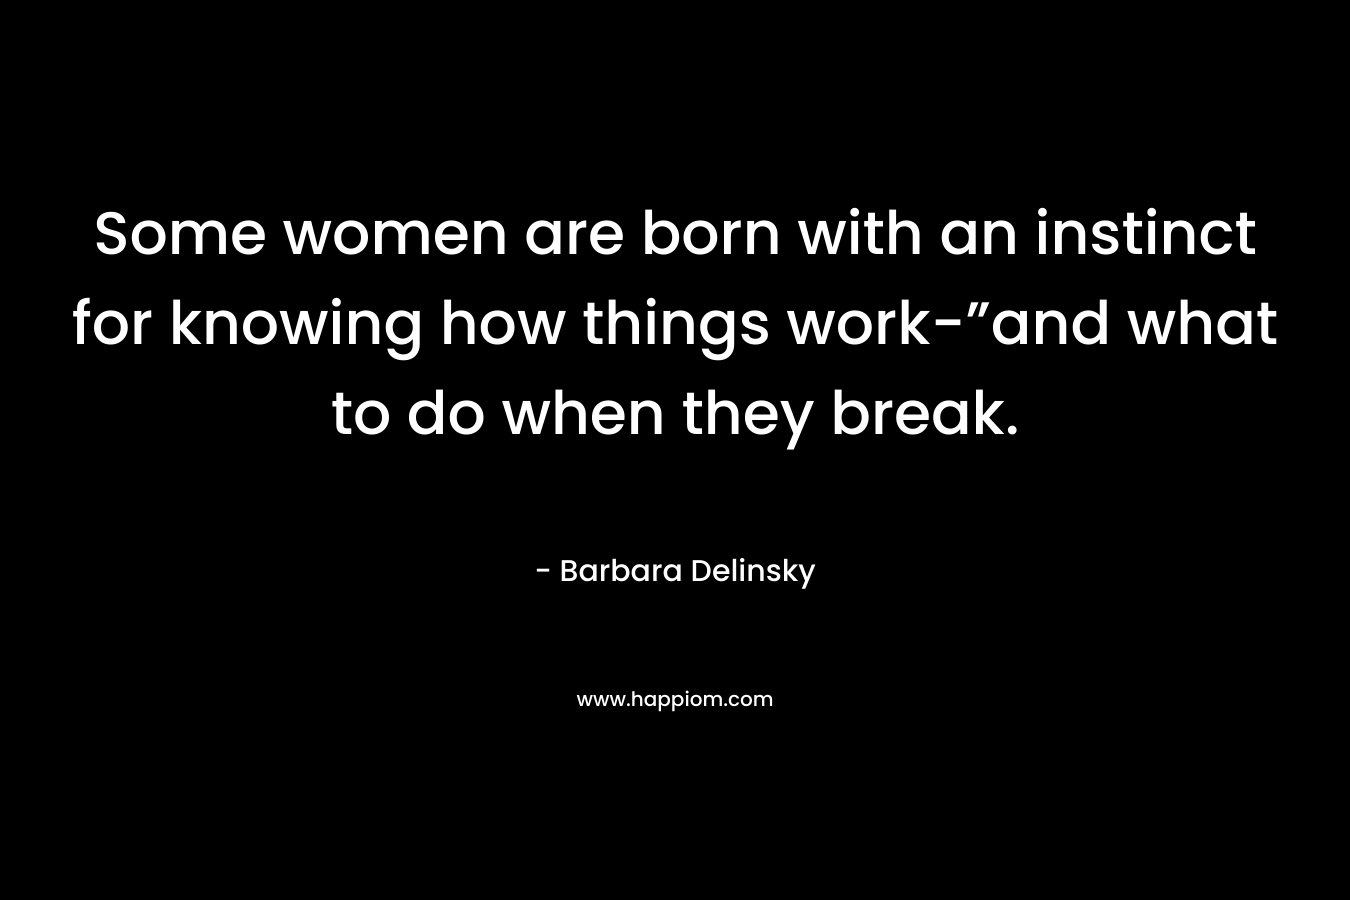 Some women are born with an instinct for knowing how things work-”and what to do when they break. – Barbara Delinsky